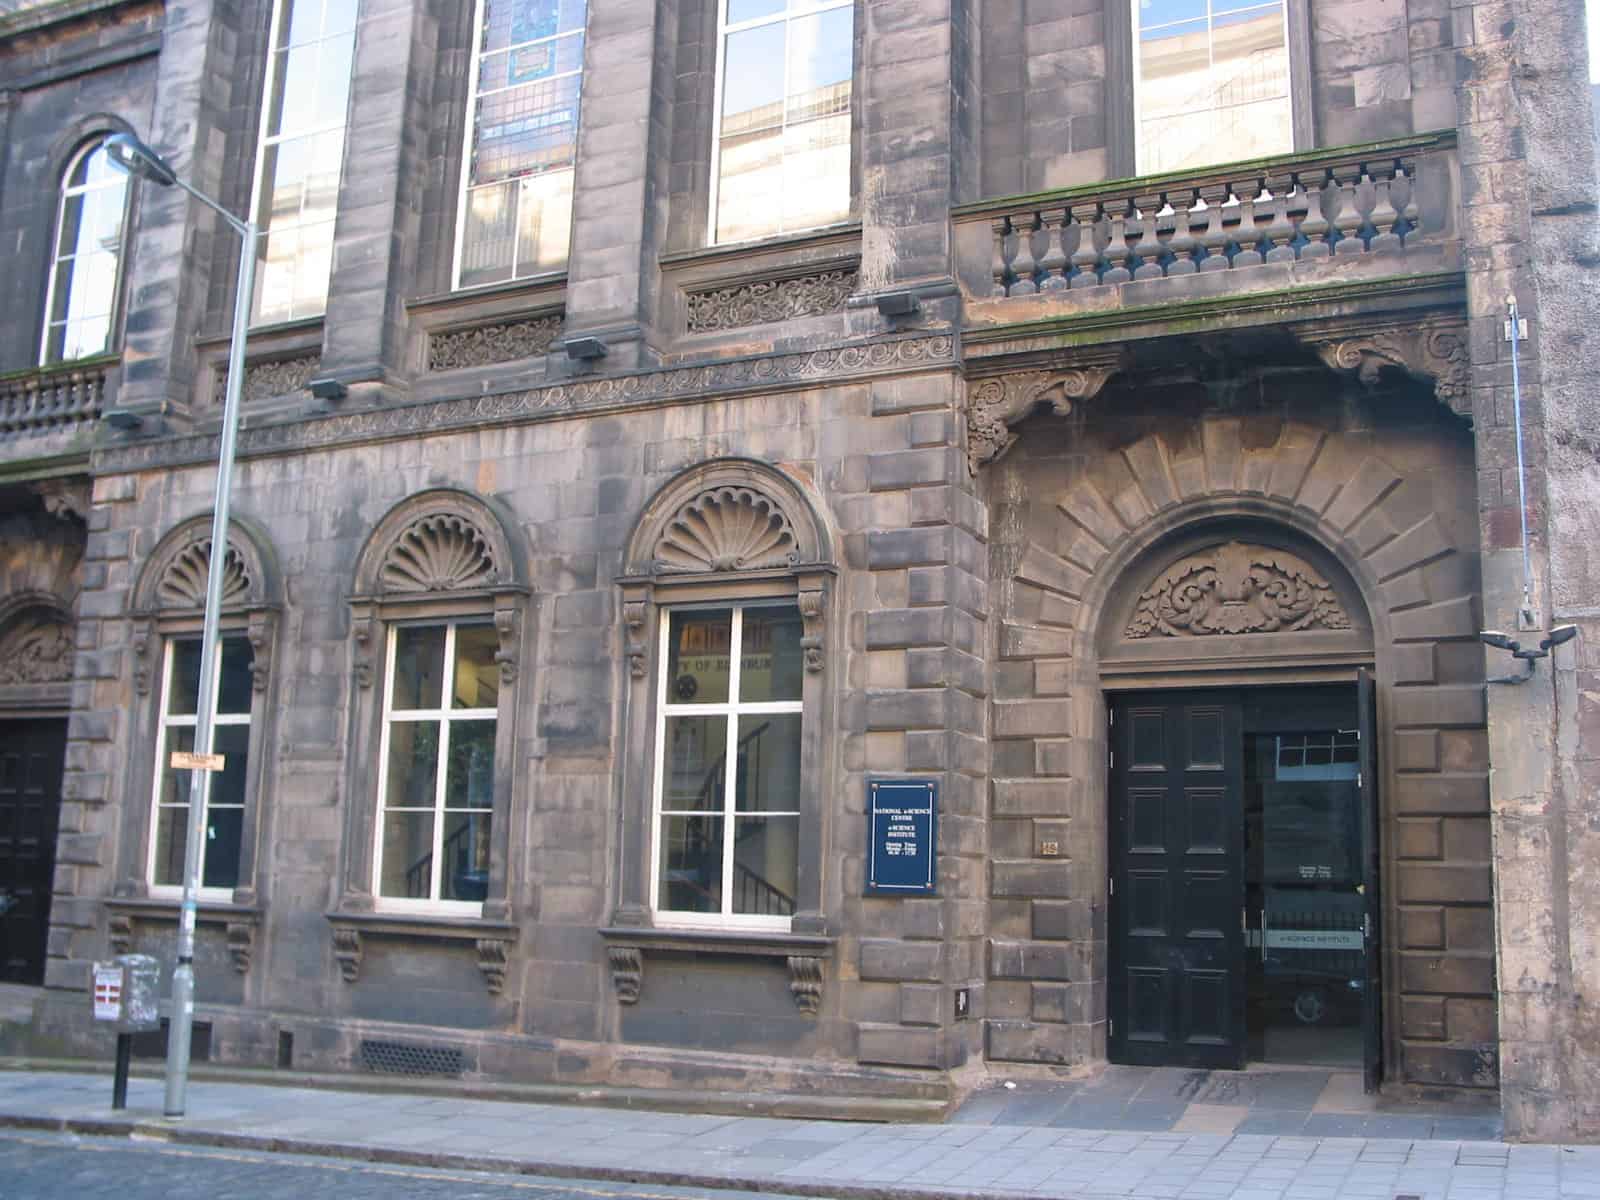 South College Street building